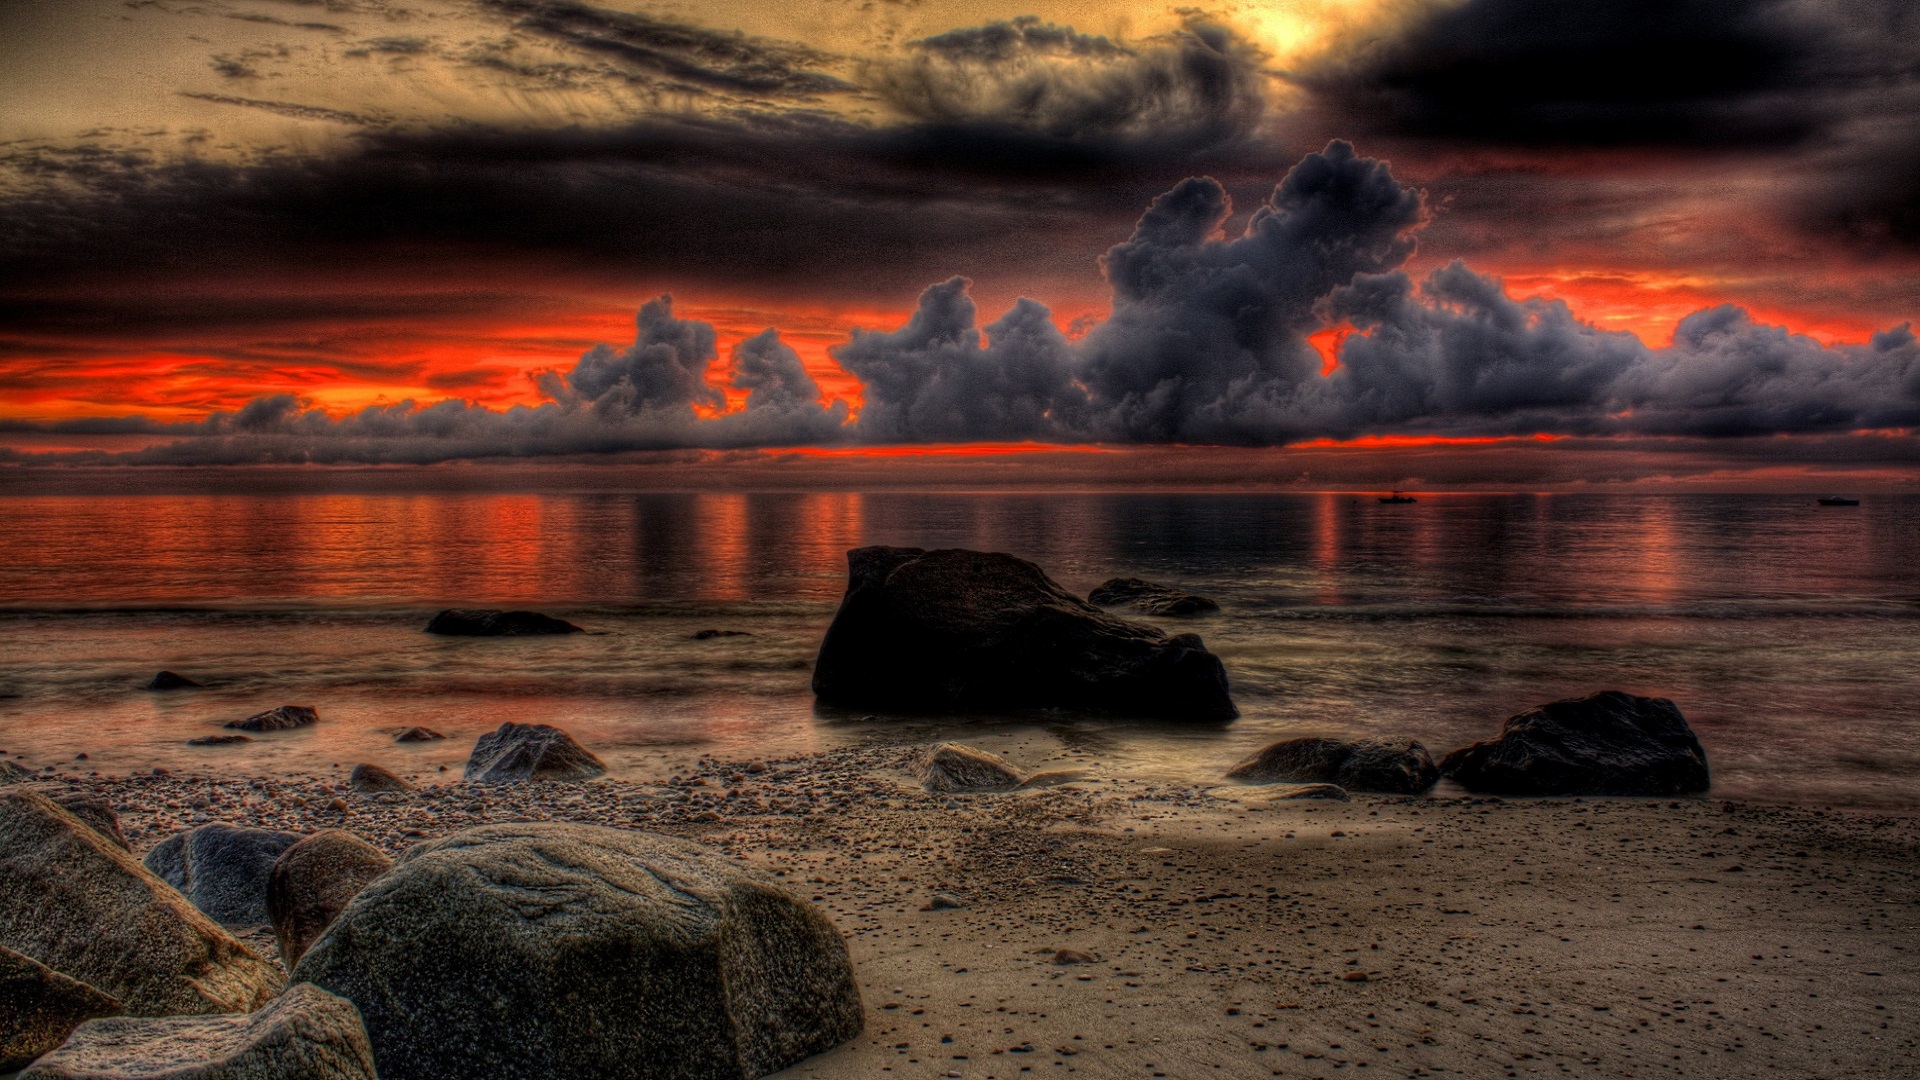 Dramatic Breathtaking Sunset Wallpaper | HD Wallpapers Download